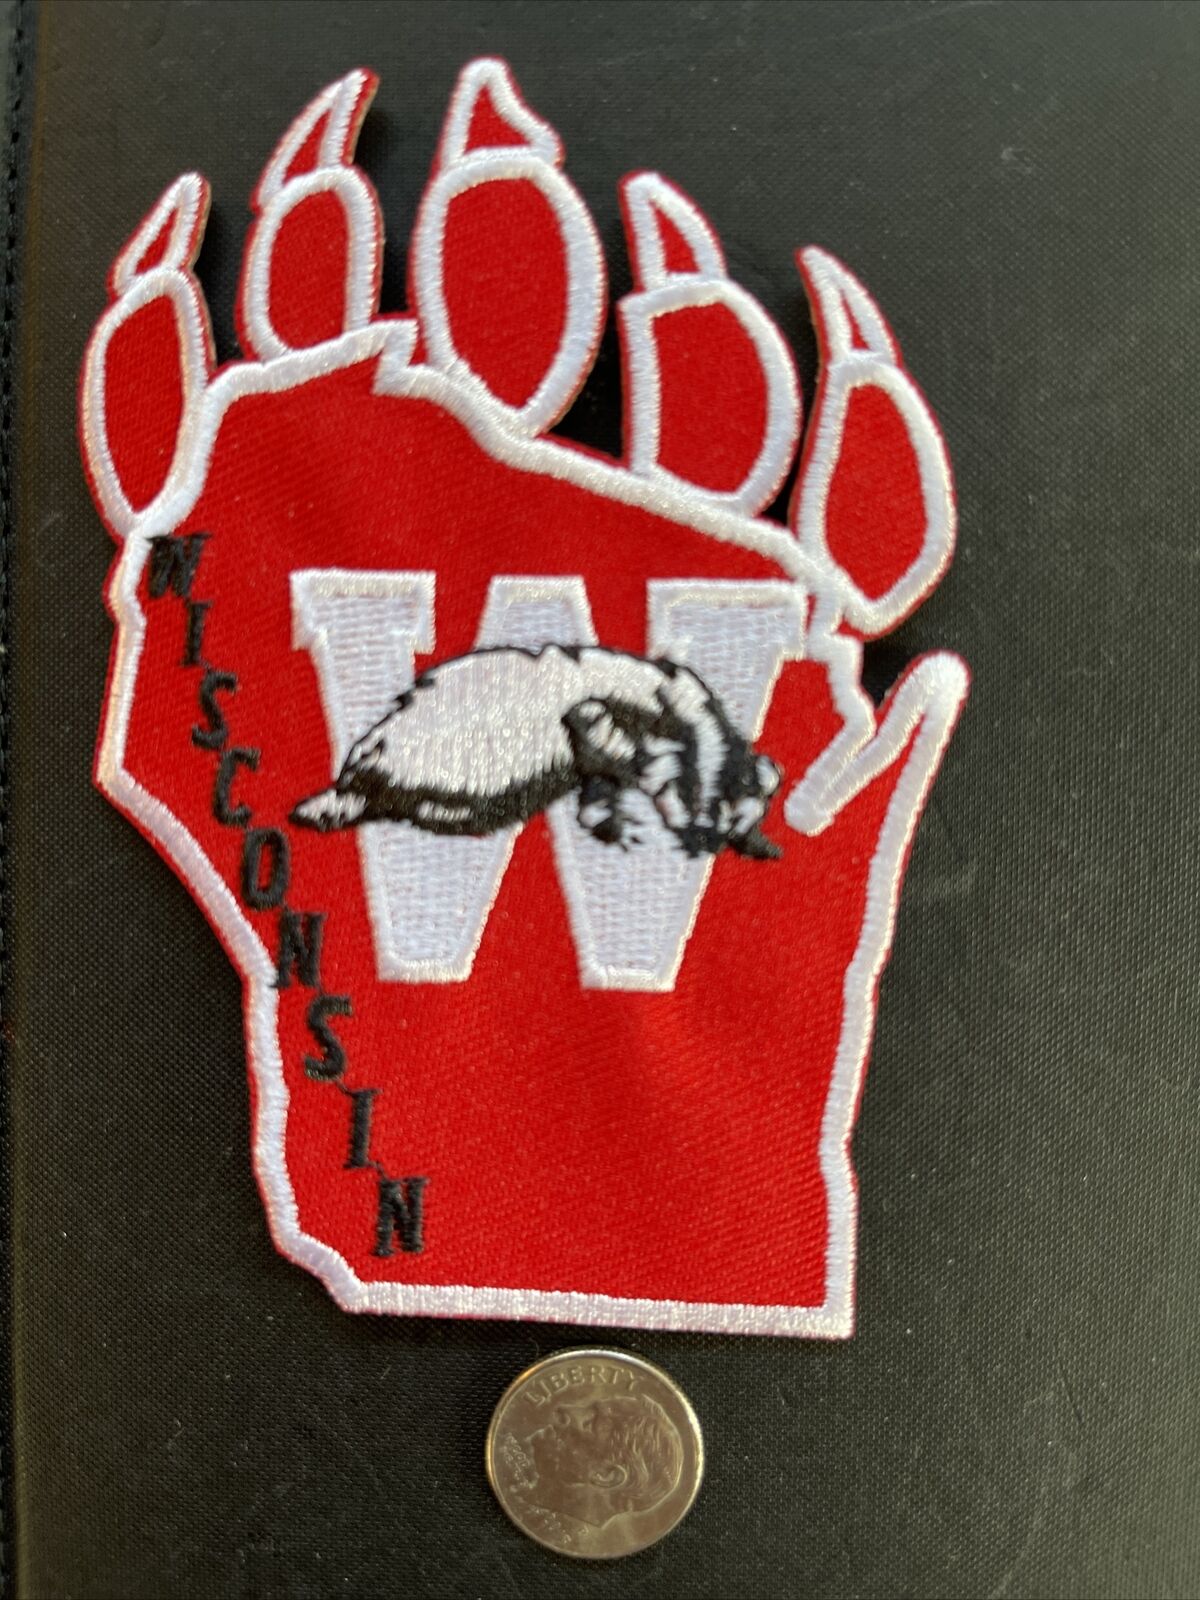 UNIVERSITY OF Wisconsin Badgers Vintage Embroidered Iron on Patch 4” X 2.5”